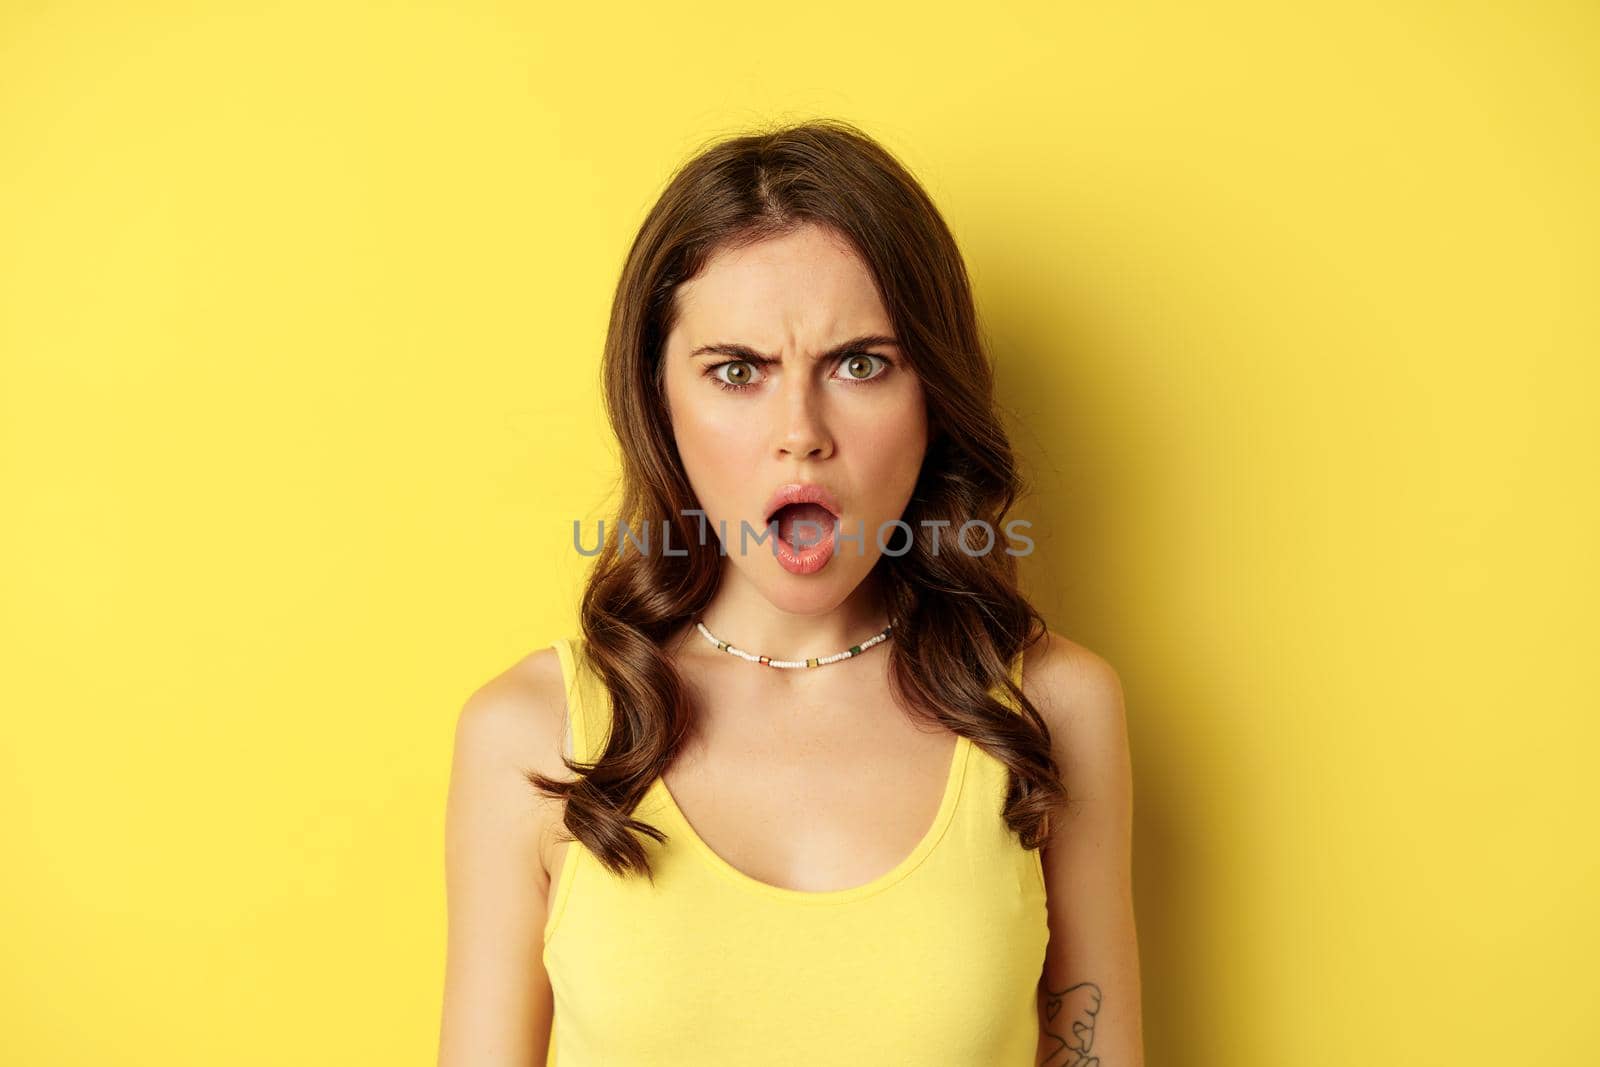 Close up portrait of shocked young woman drop jaw, gasping and looking frustrated, standing against yellow background. Copy space